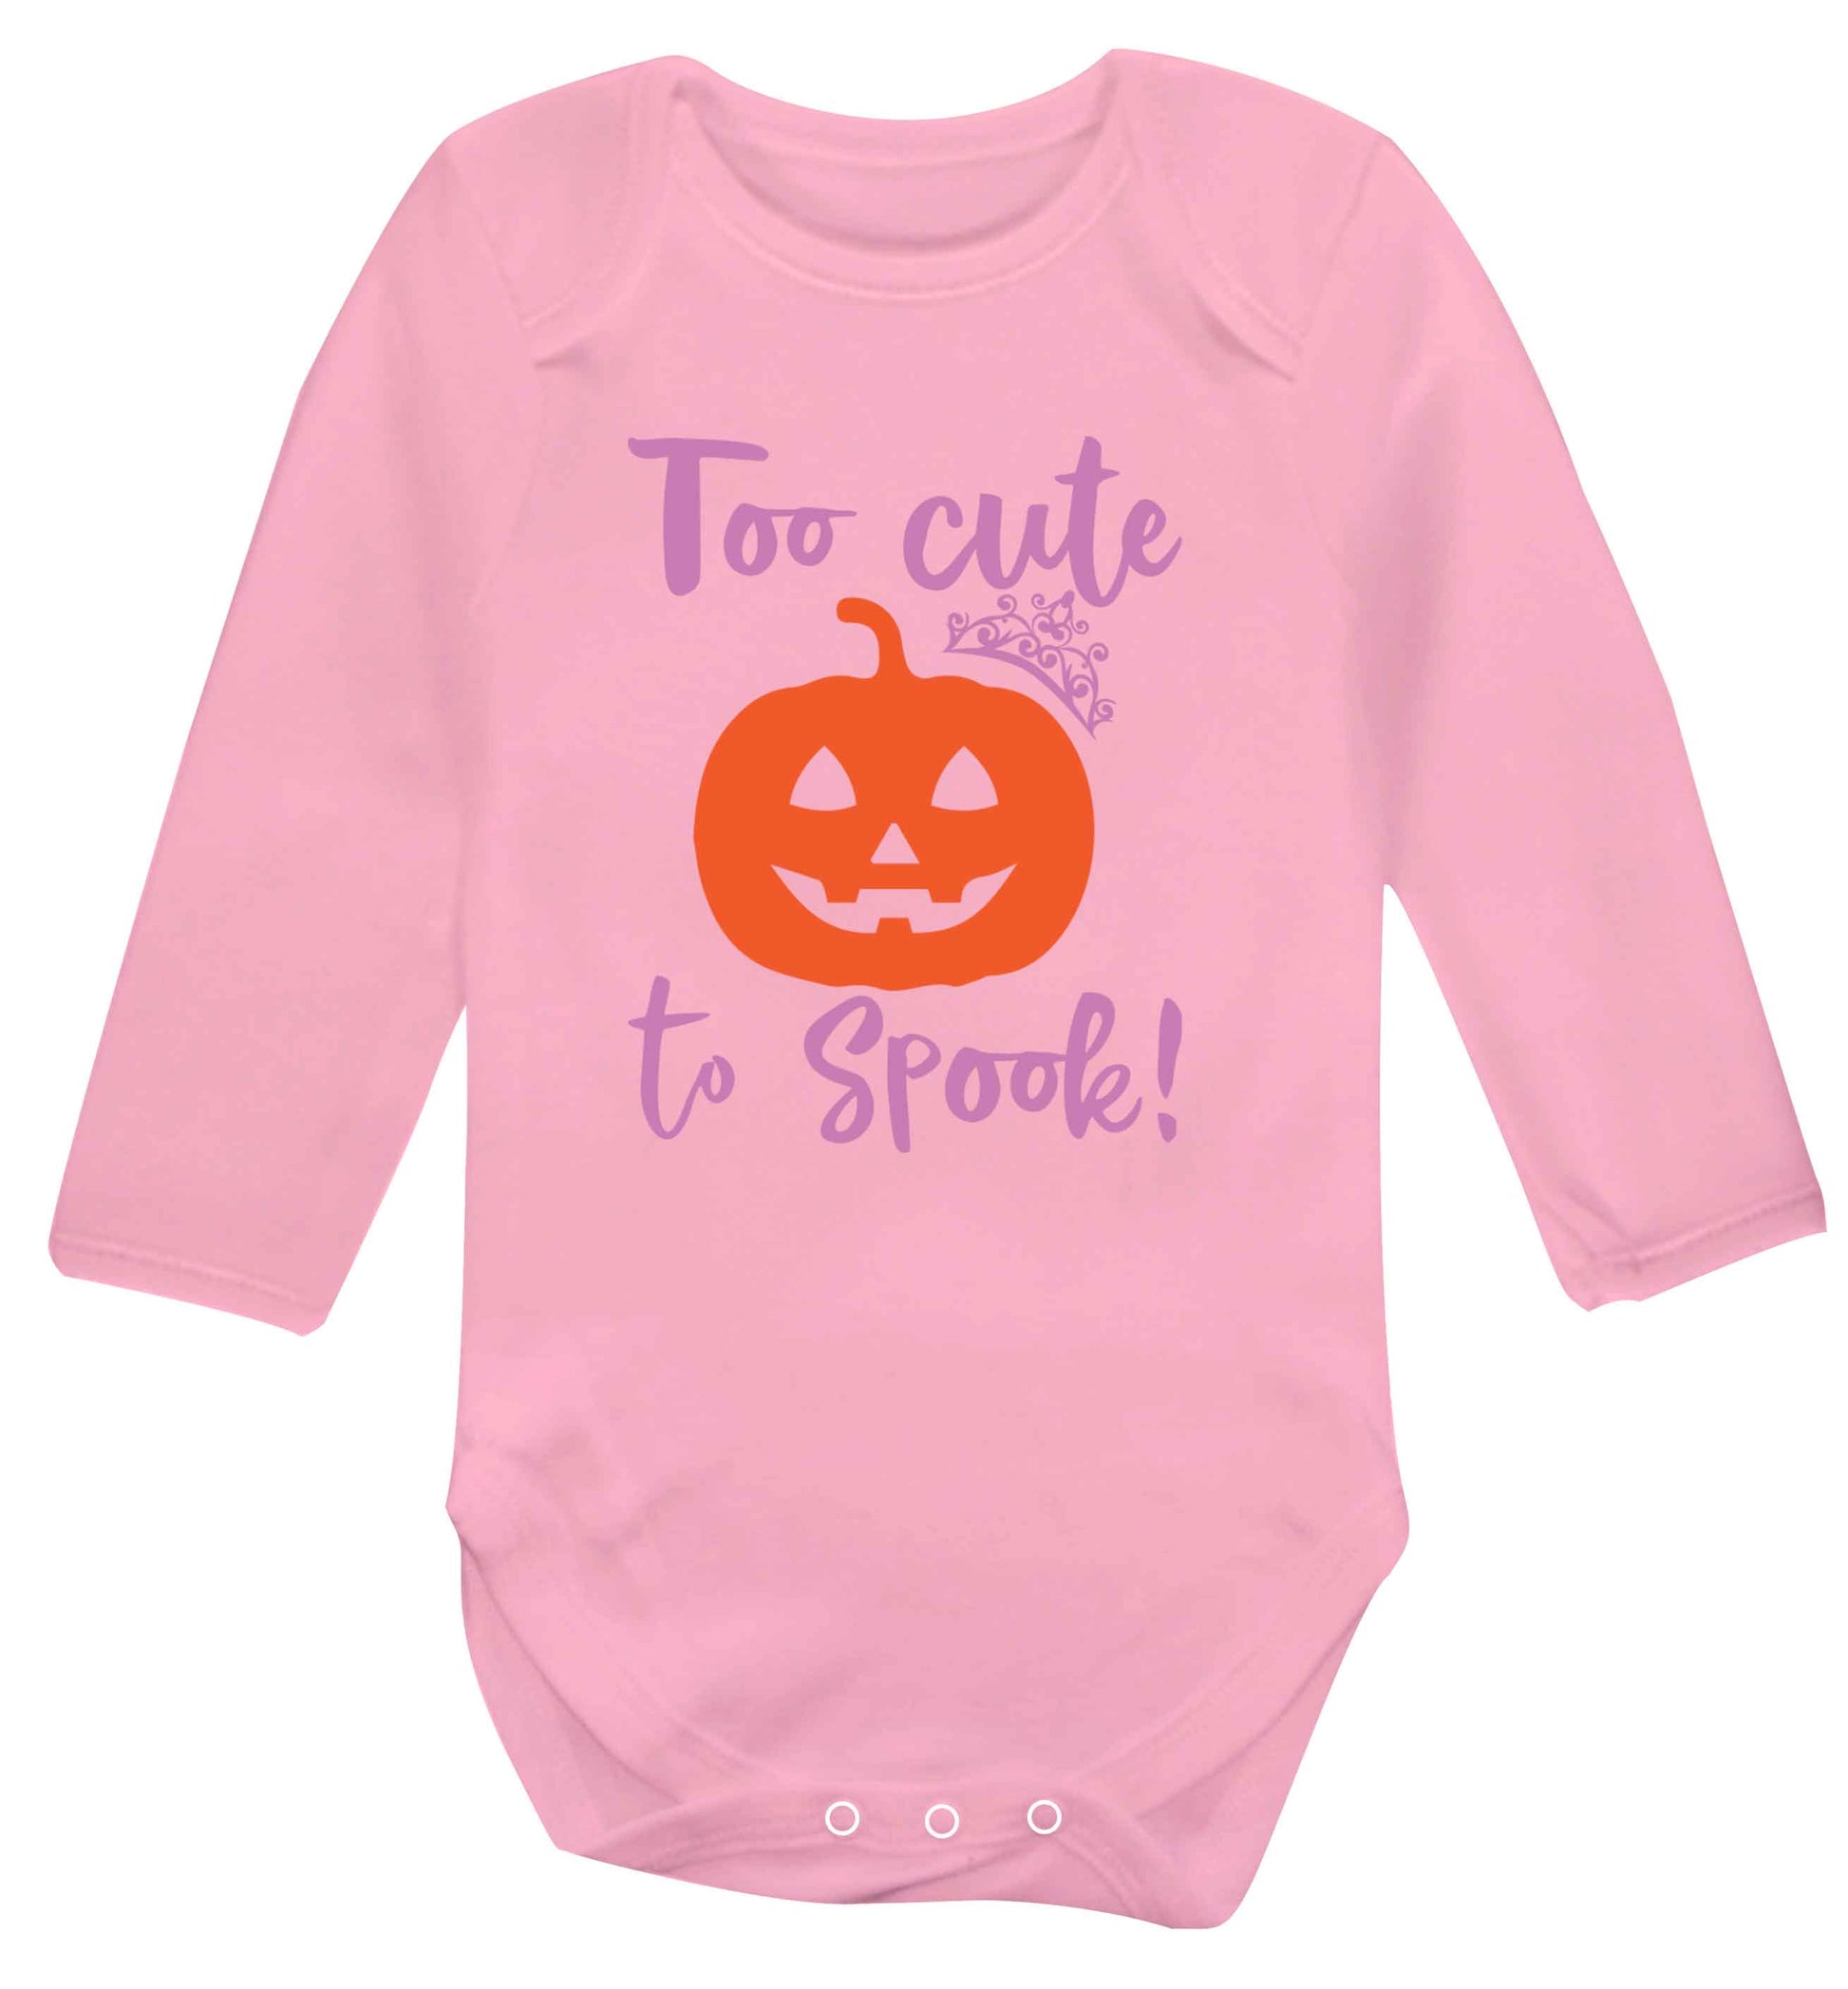 Too cute to spook! Baby Vest long sleeved pale pink 6-12 months